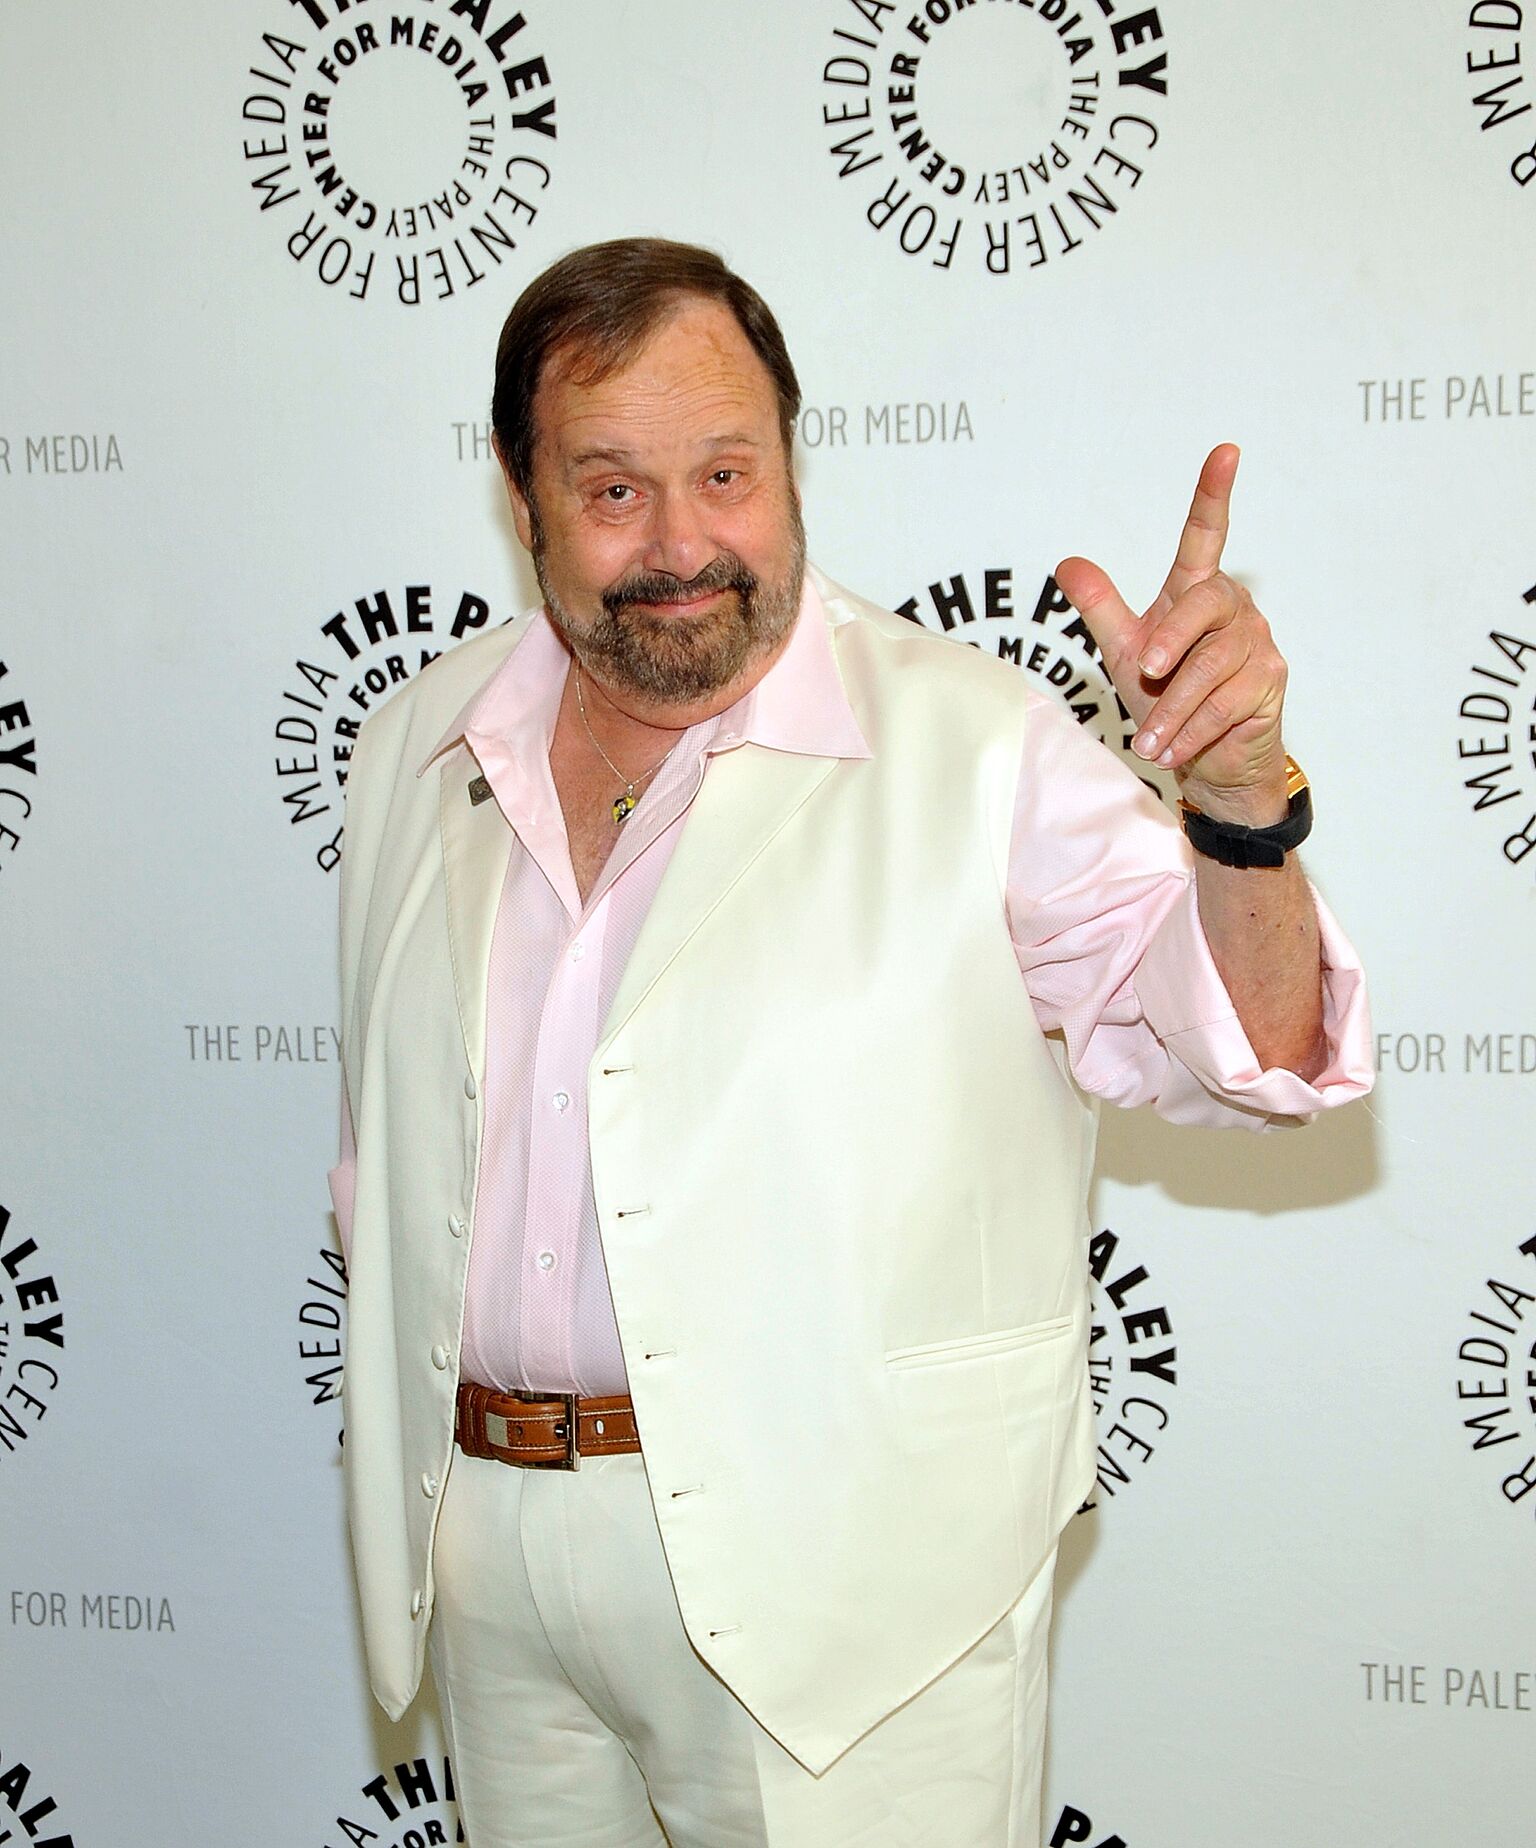 Frank Bank at the Paley Center For Media in Beverly Hills on June 21, 2010 in Beverly Hills, California | Photo: Getty Images